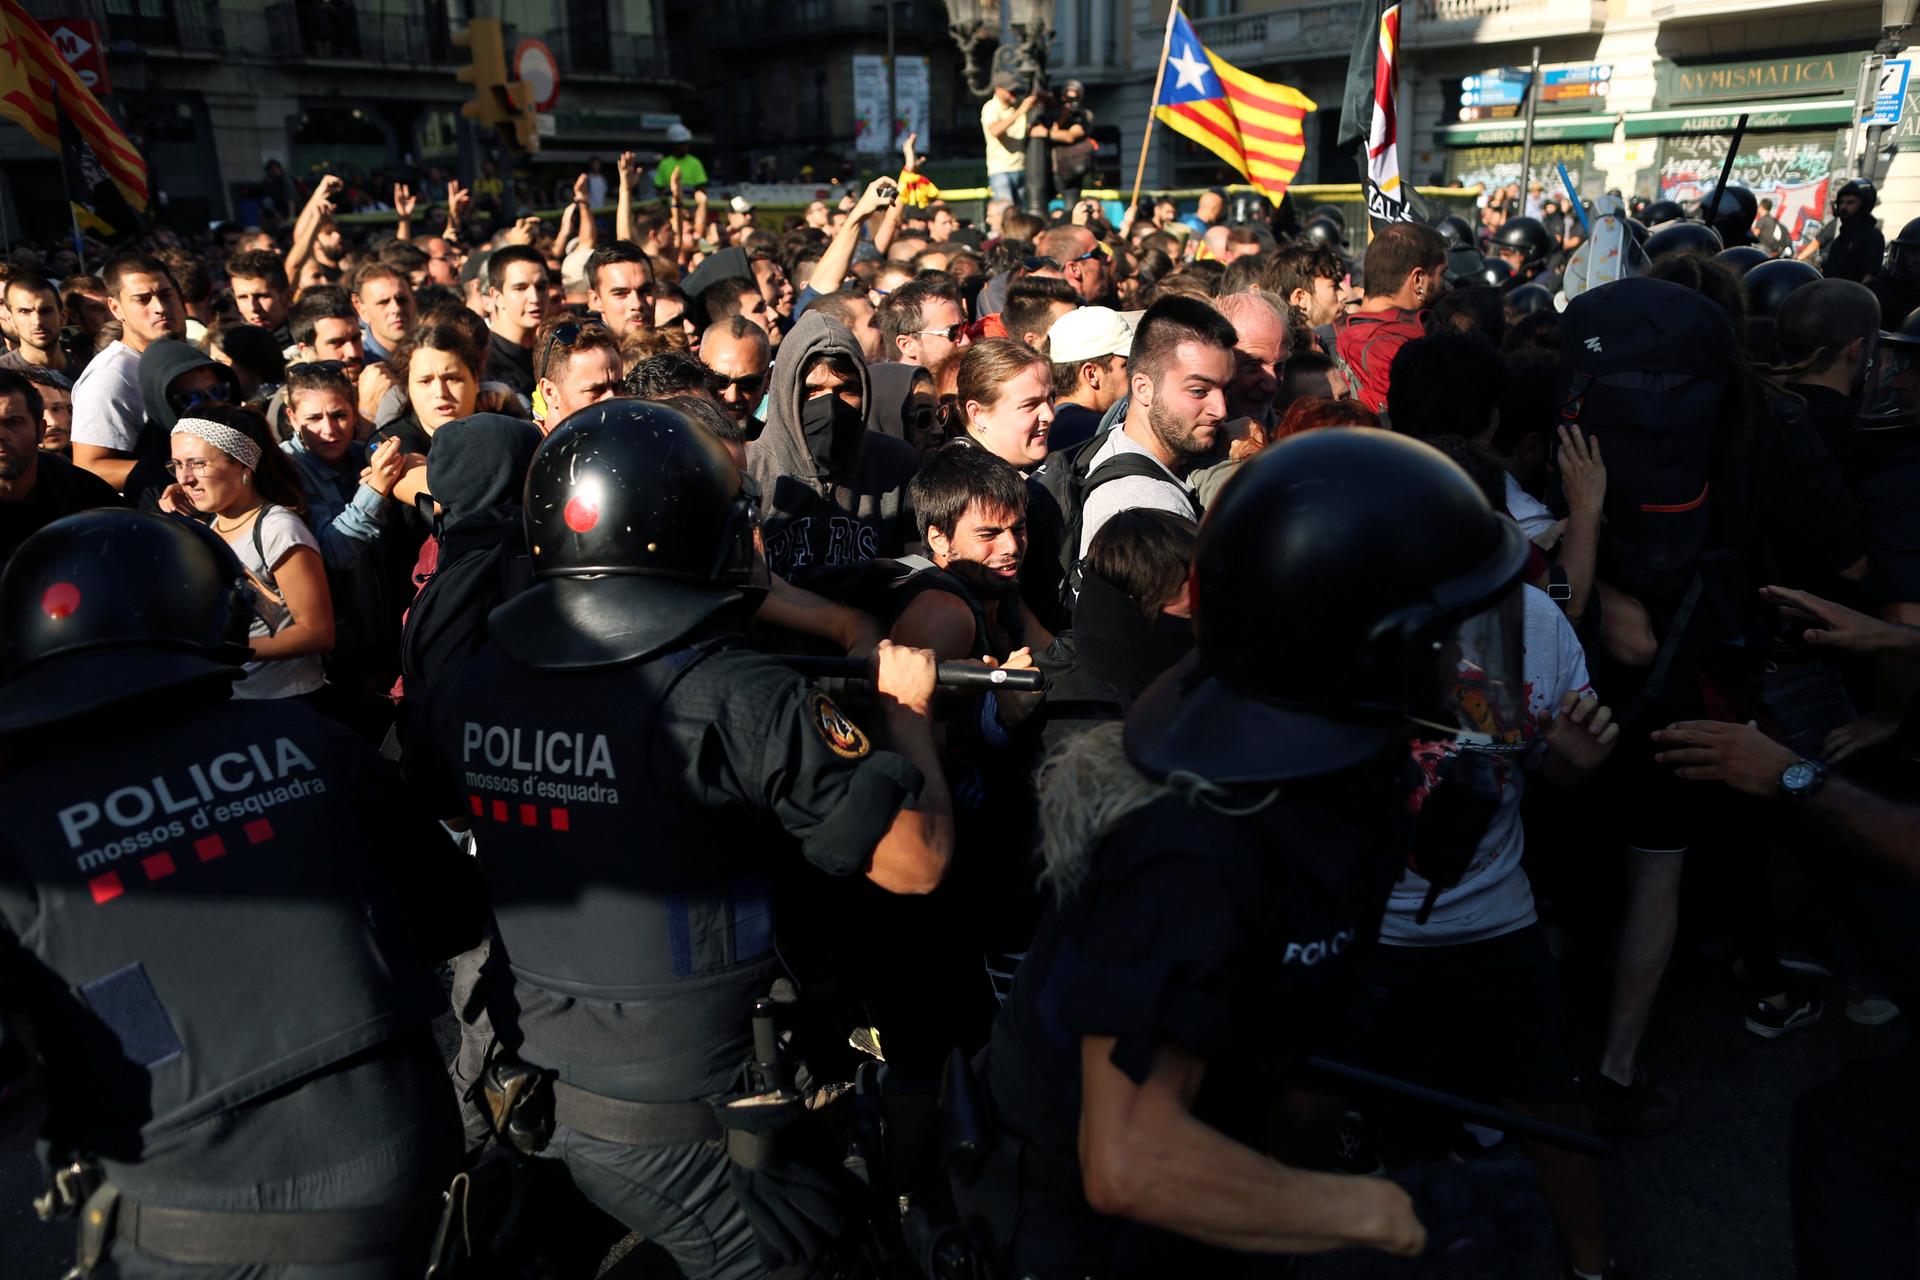 protesters clash with a Catalan flag waving in the background